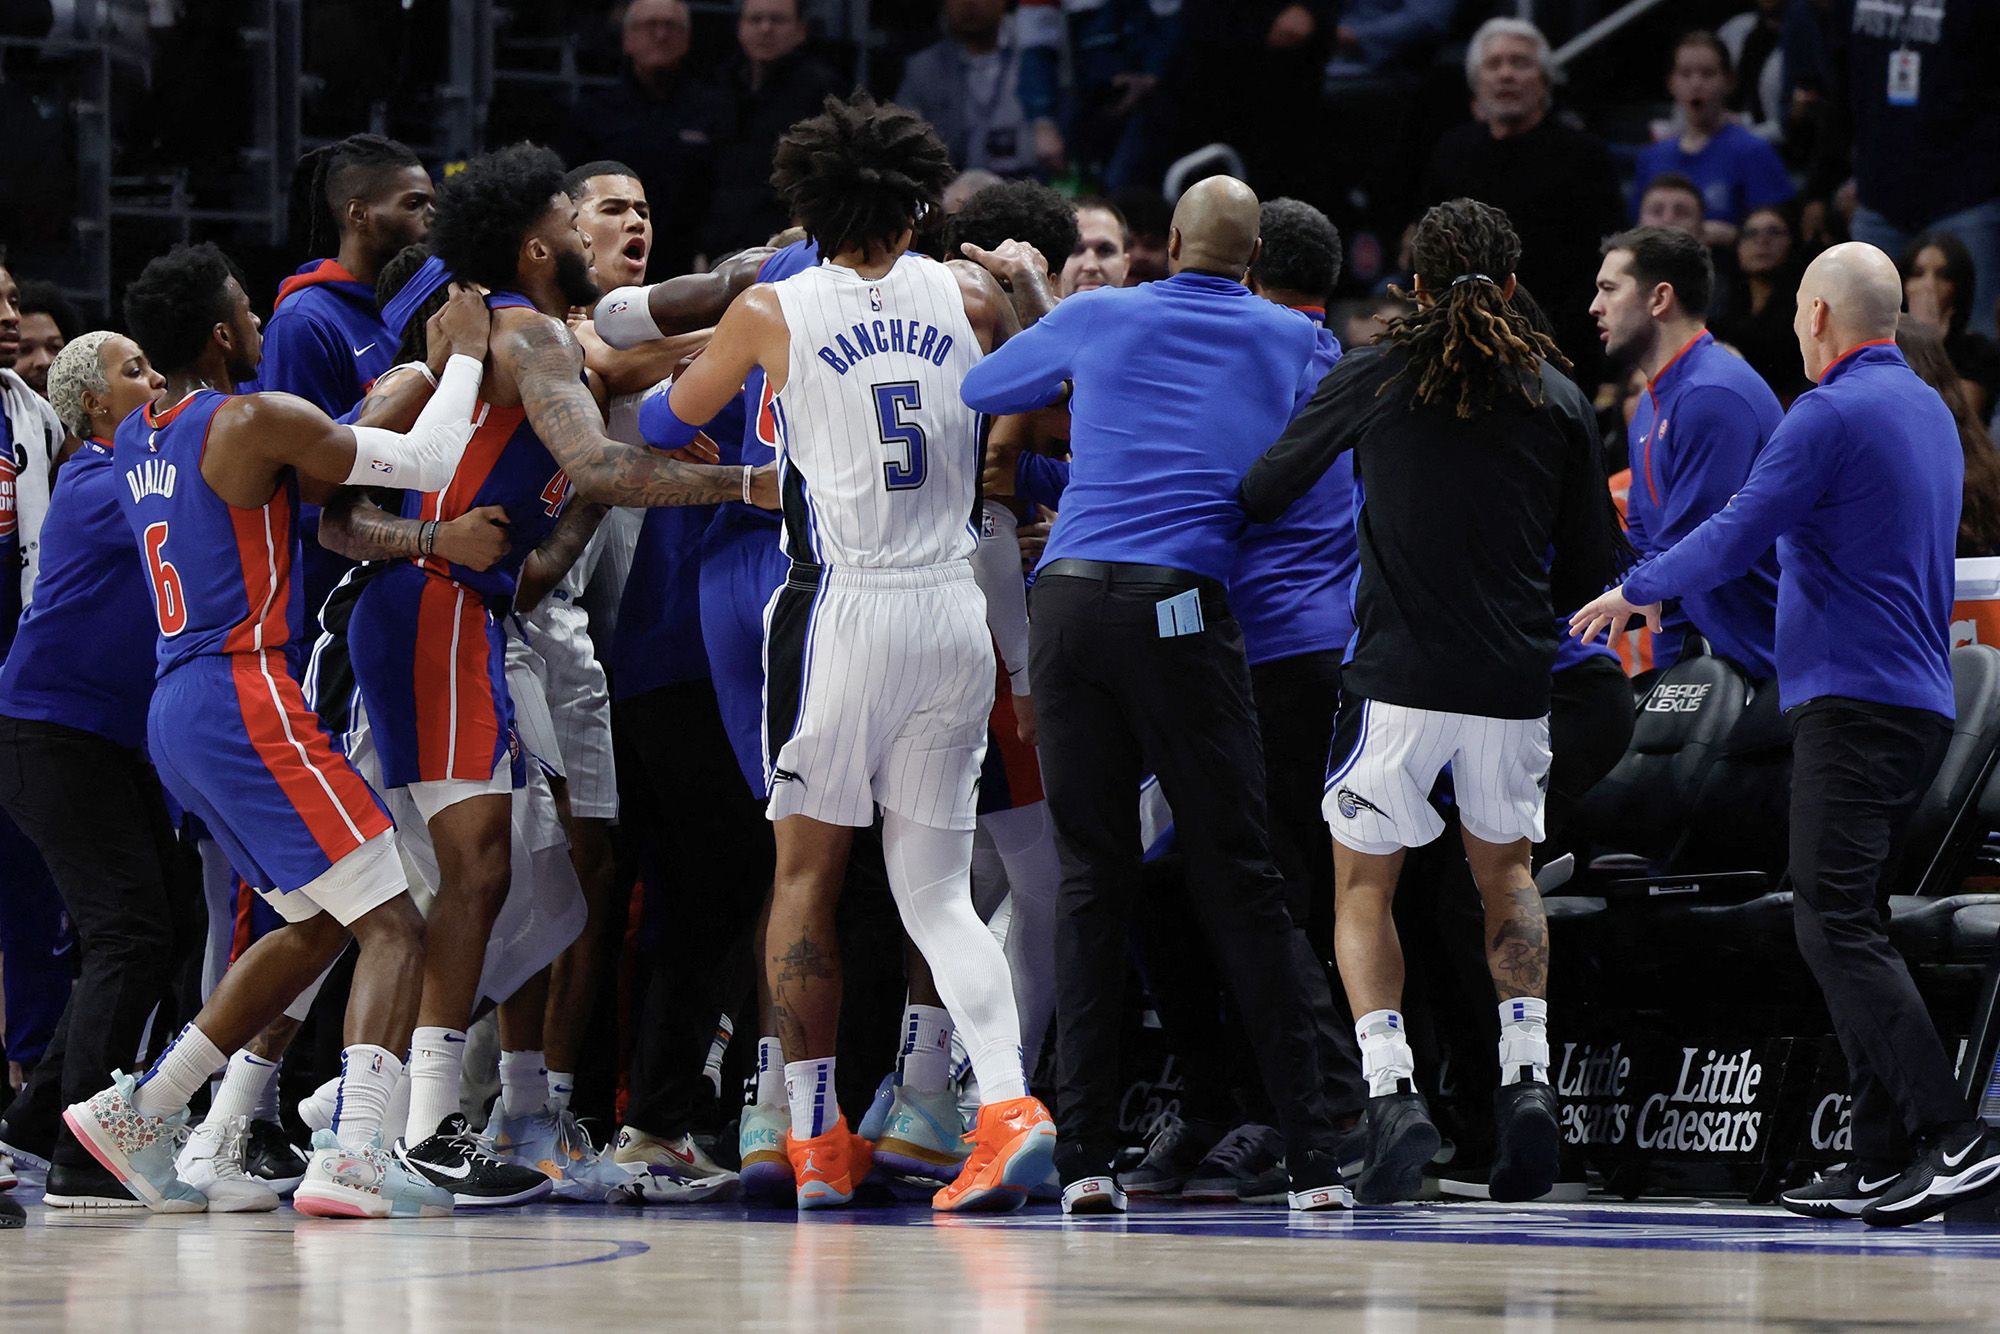 Detroit Pistons vs. Orlando Magic: Three players ejected after  bench-clearing brawl | CNN